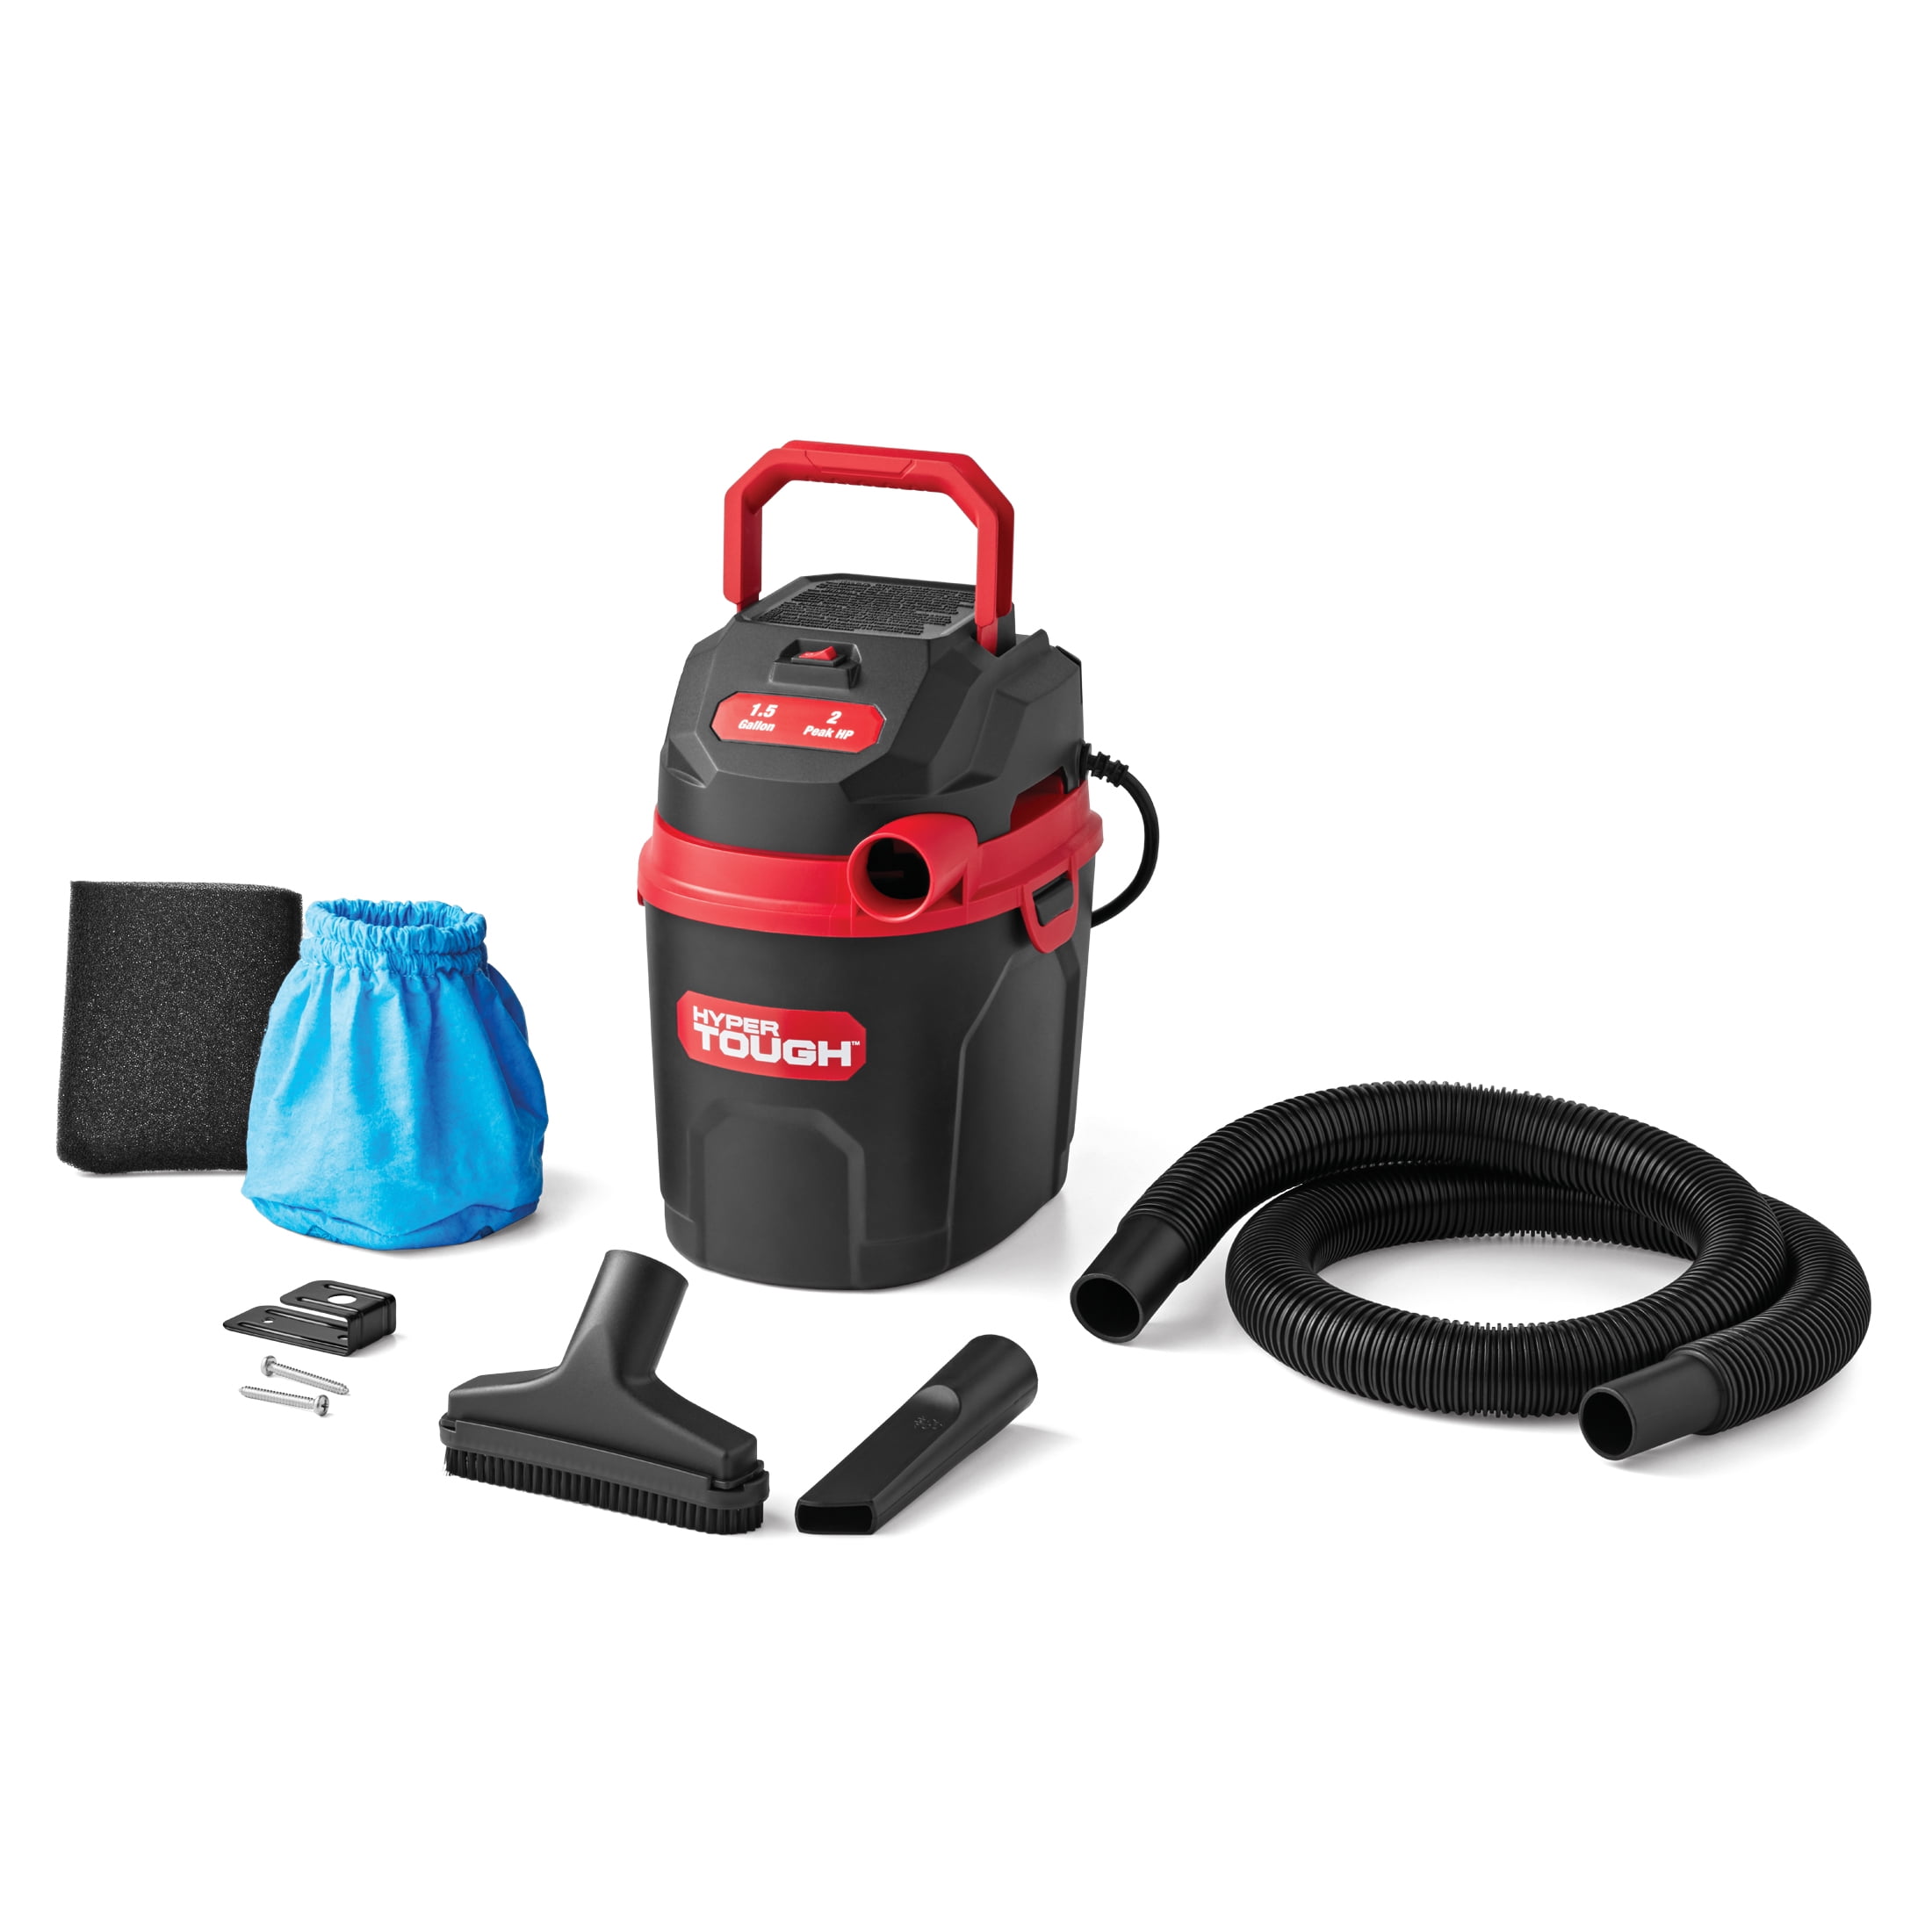 Hyper Tough 5 Gallon Wet/Dry Vacuum for The Car, Garage, Home or Workshop